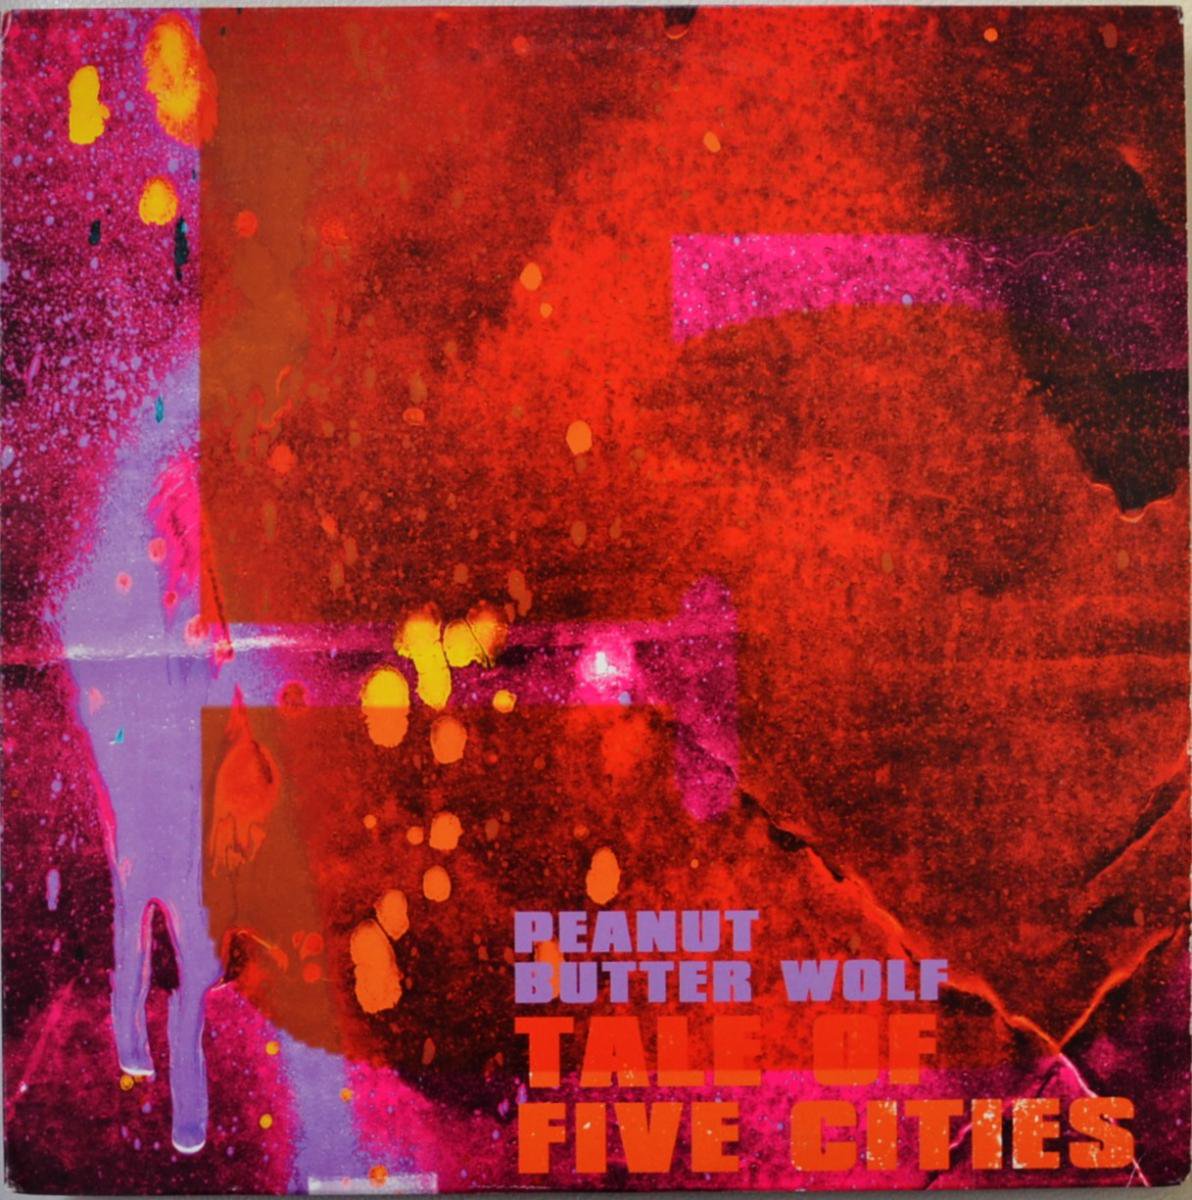 PEANUT BUTTER WOLF / TALE OF FIVE CITIES / RUN THE LINE (45 KING MIX,LORD FINESSE MIX) (12